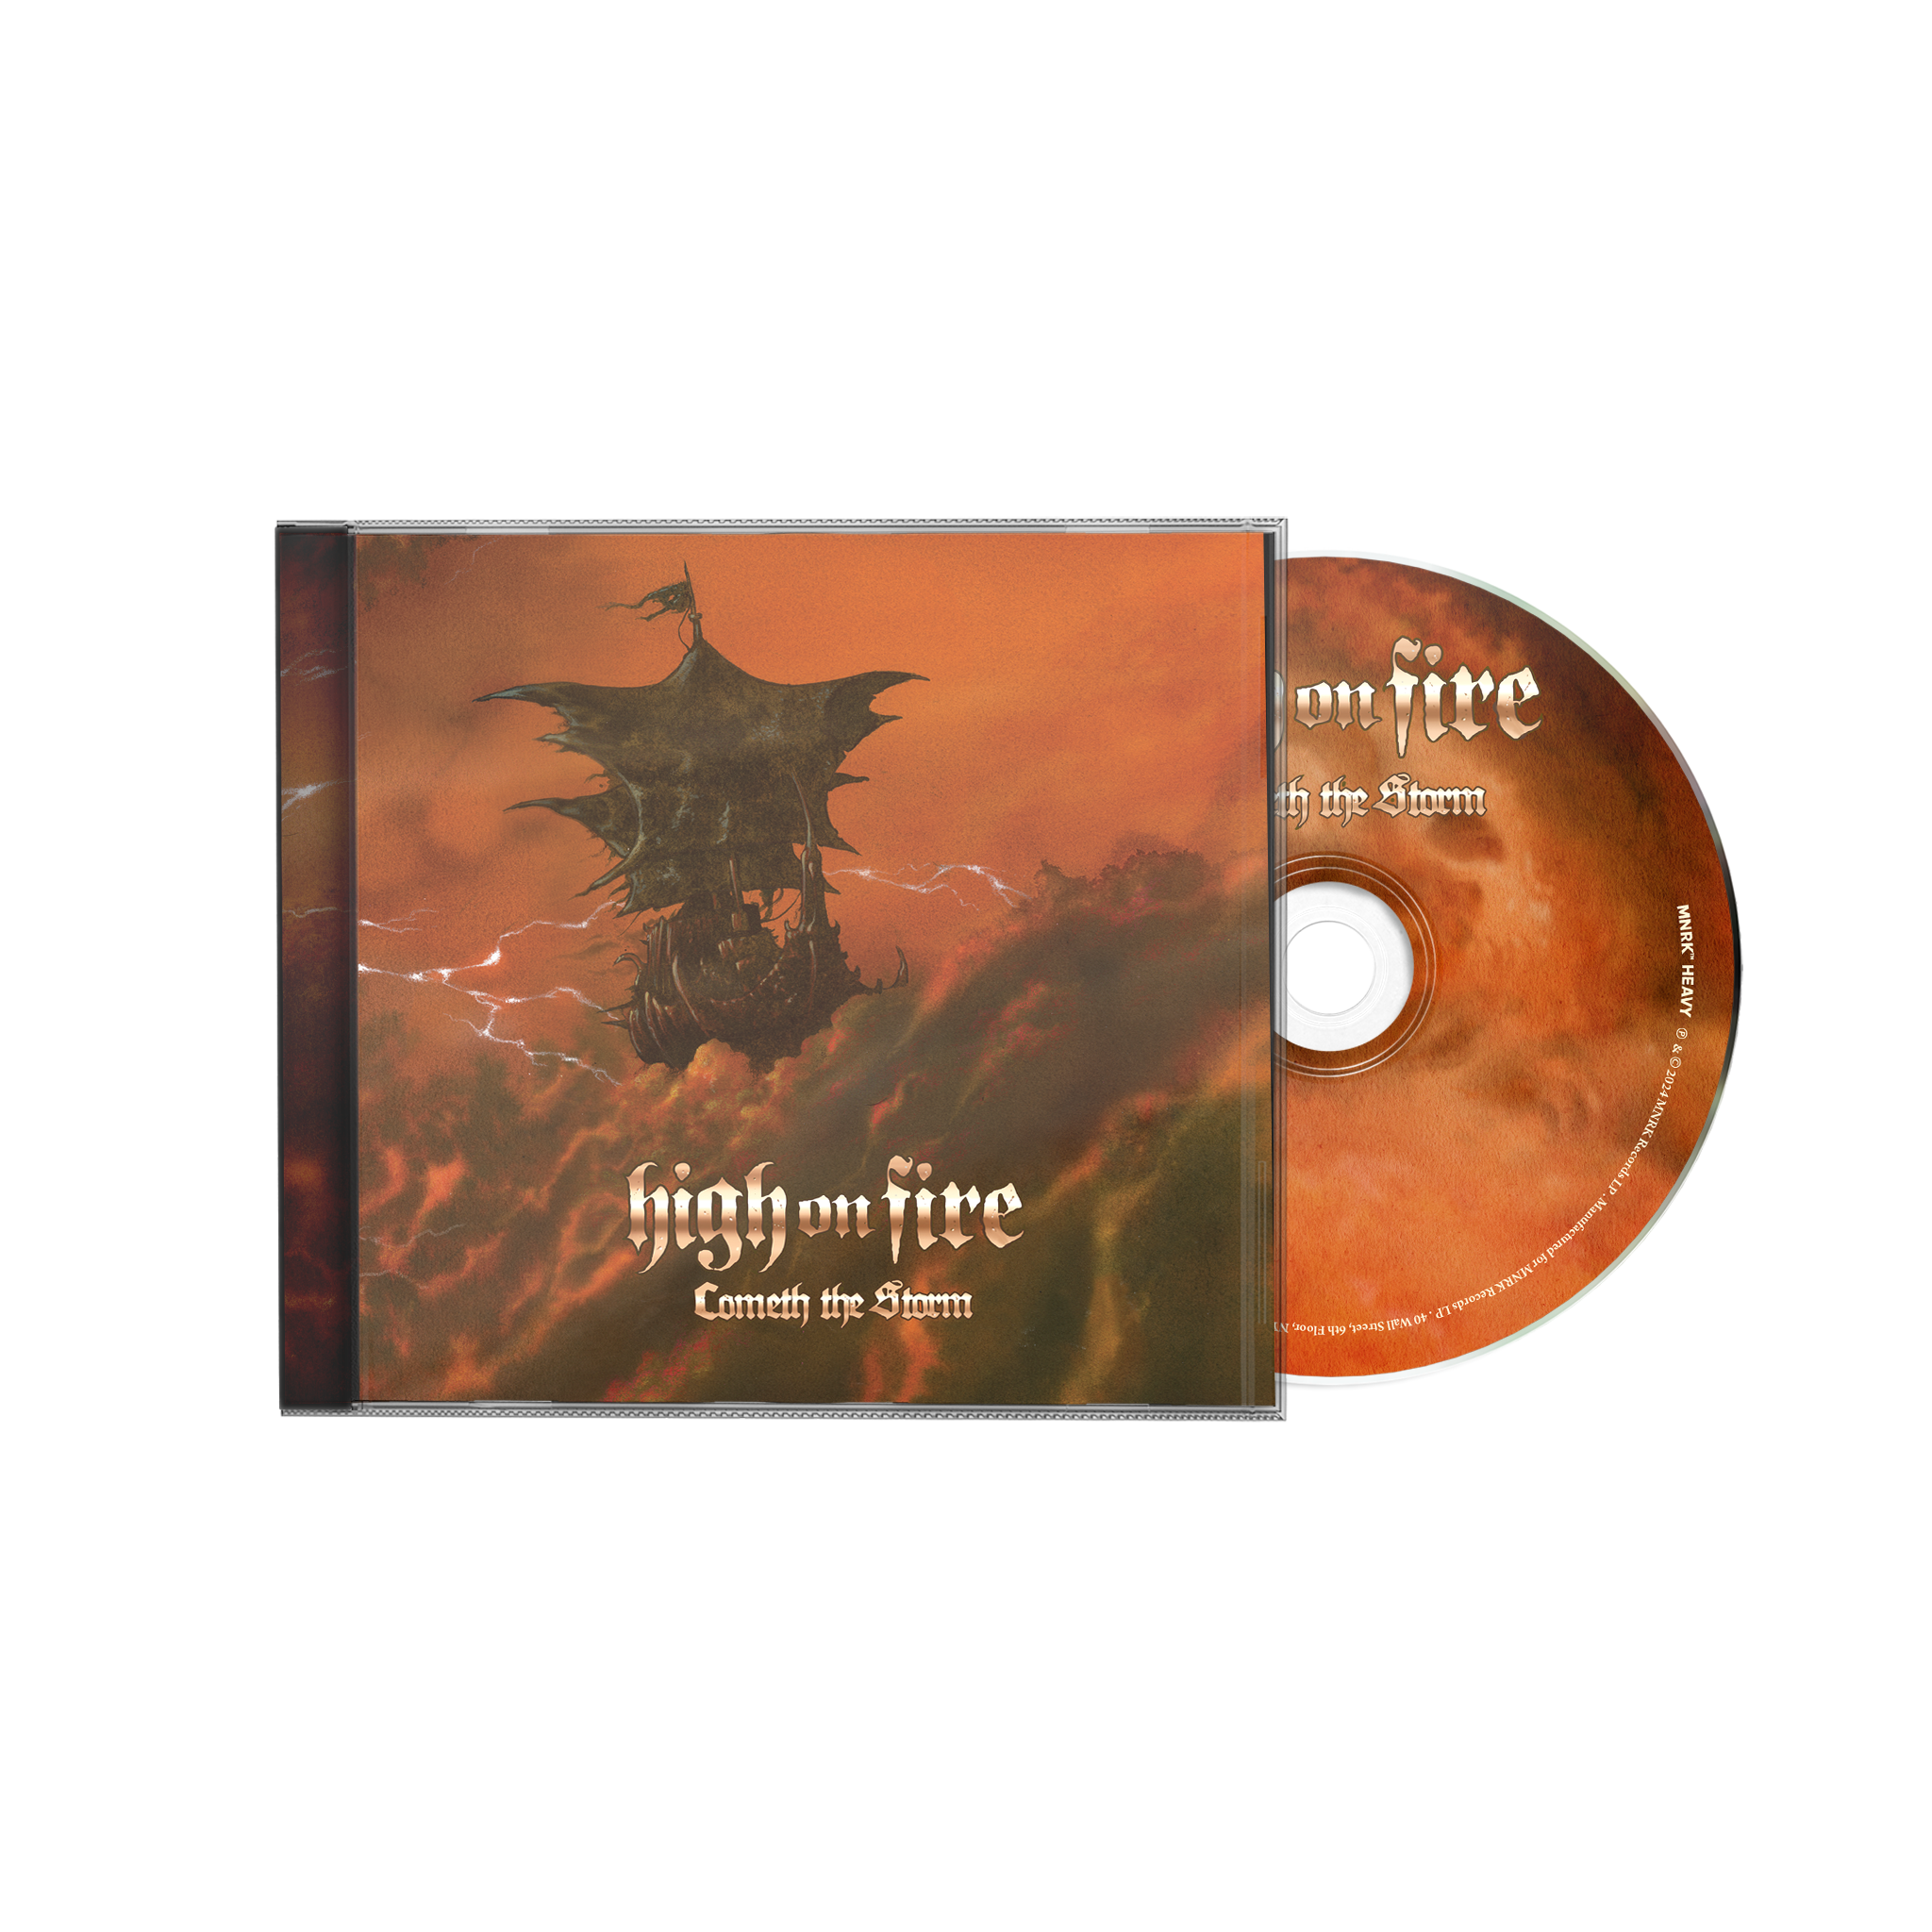 High On Fire Bundle. Available Now